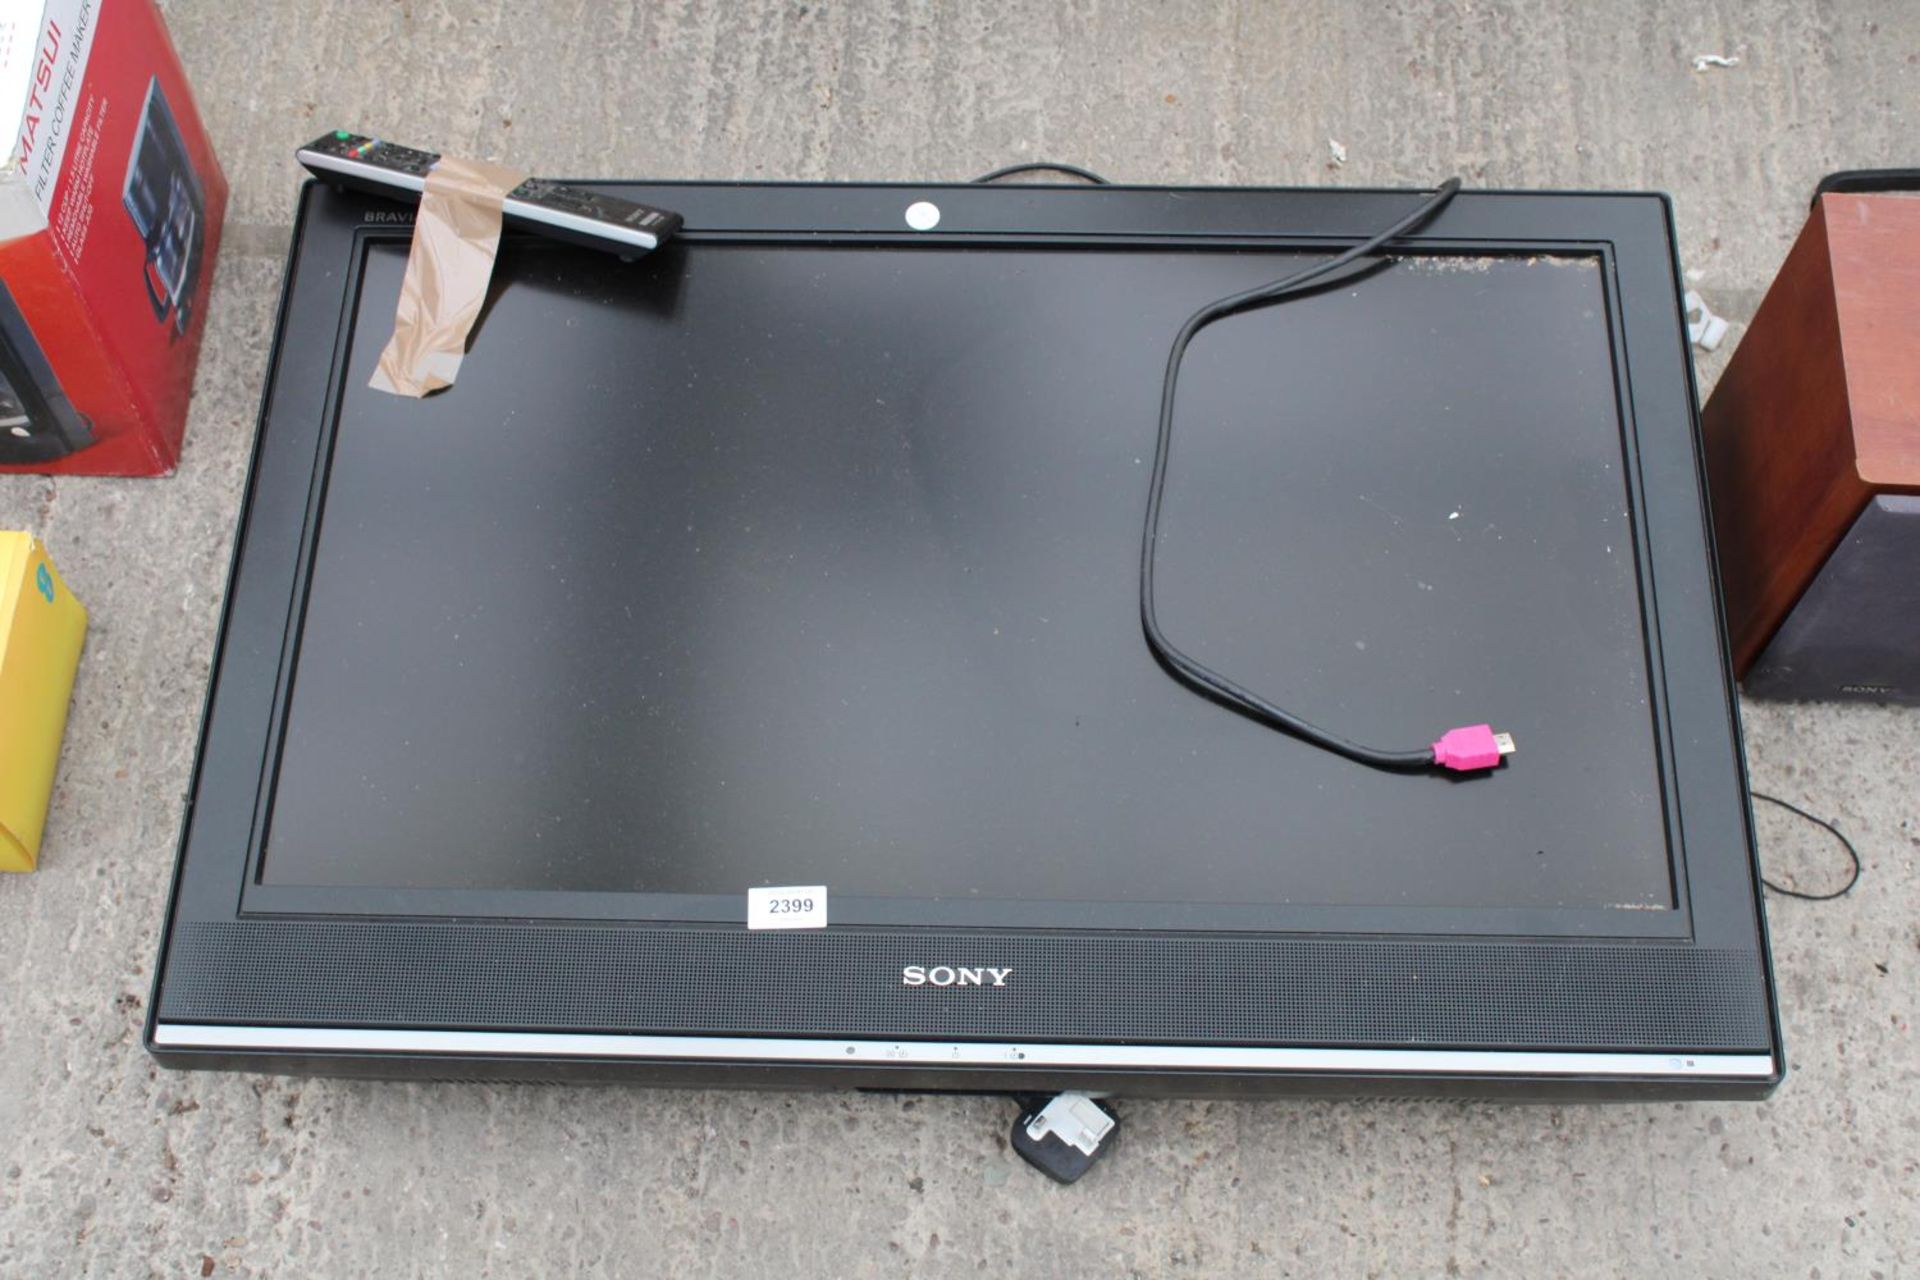 A SONY TELEVISION WITH REMOTE CONTROL